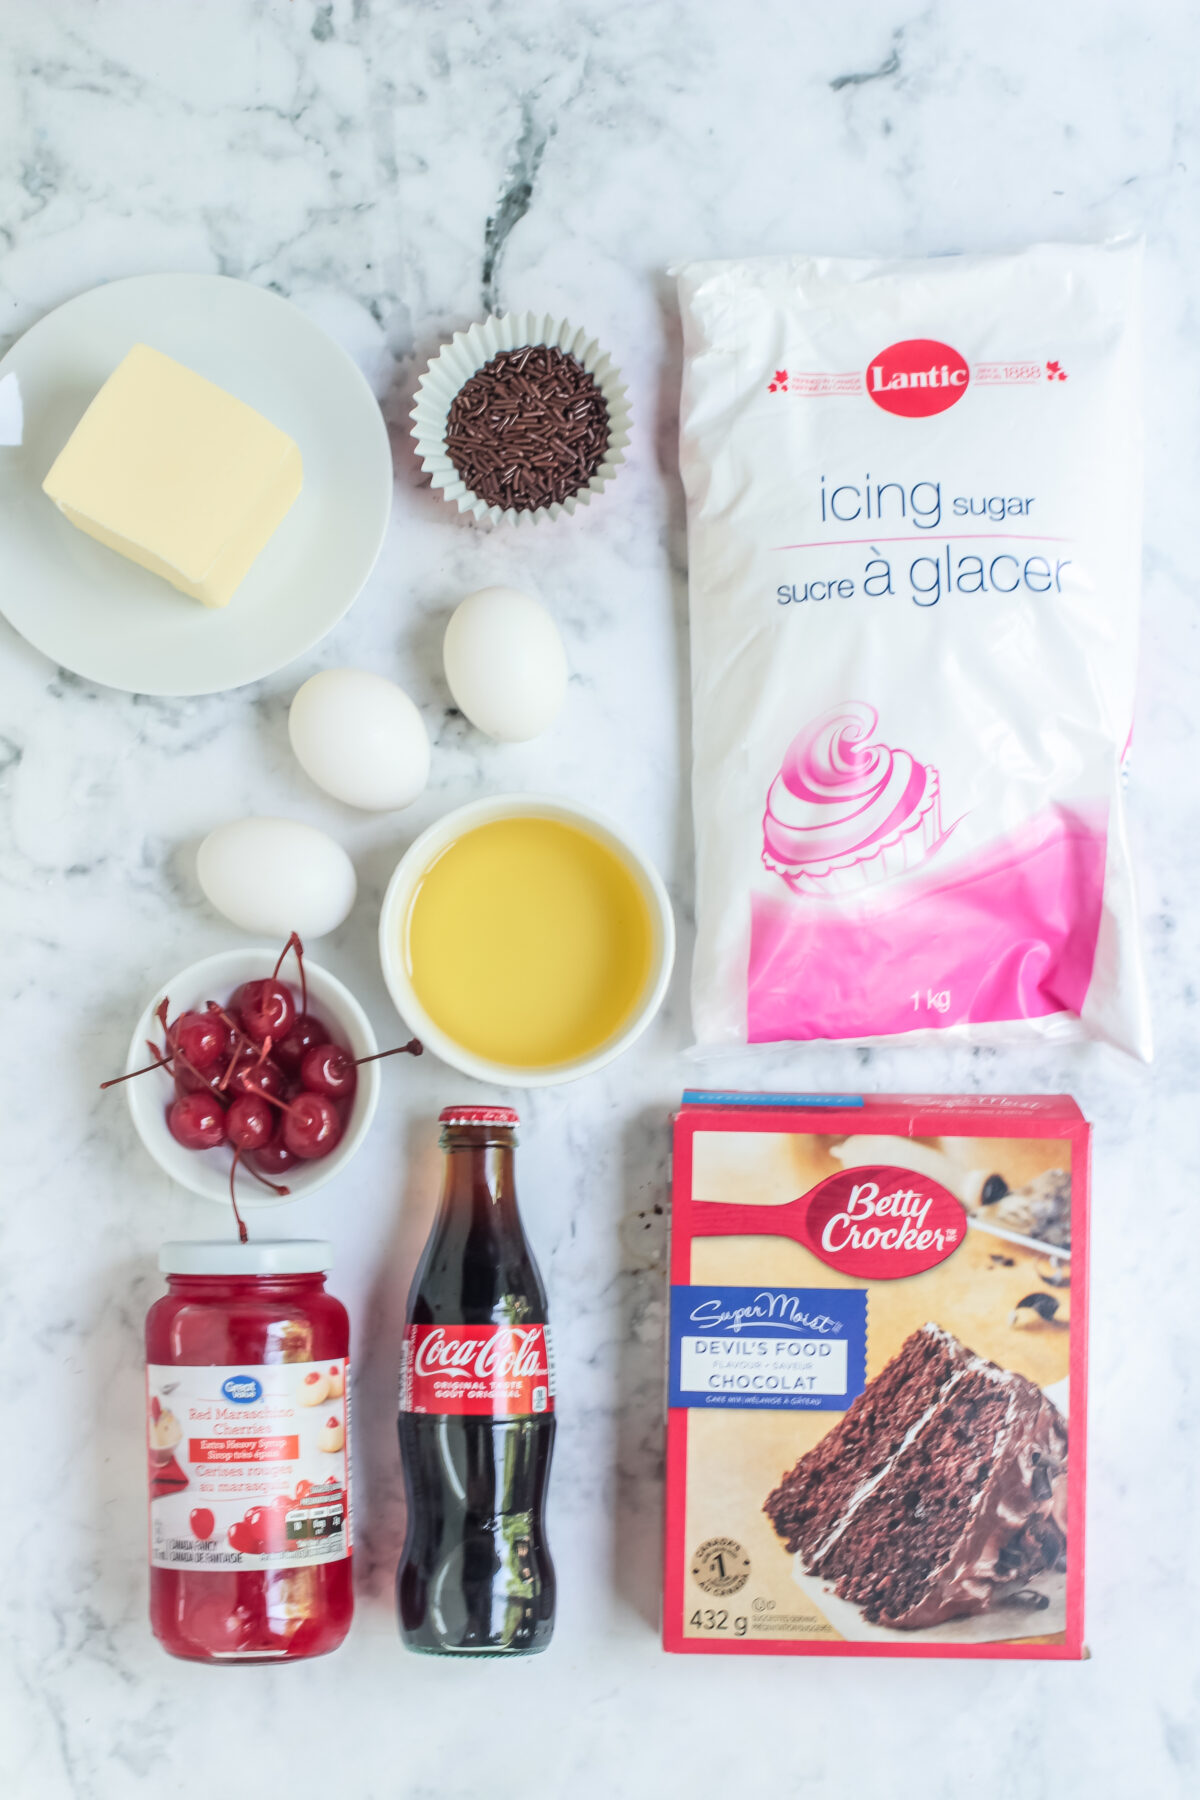 Ingredients for Cherry Coke Cupakes